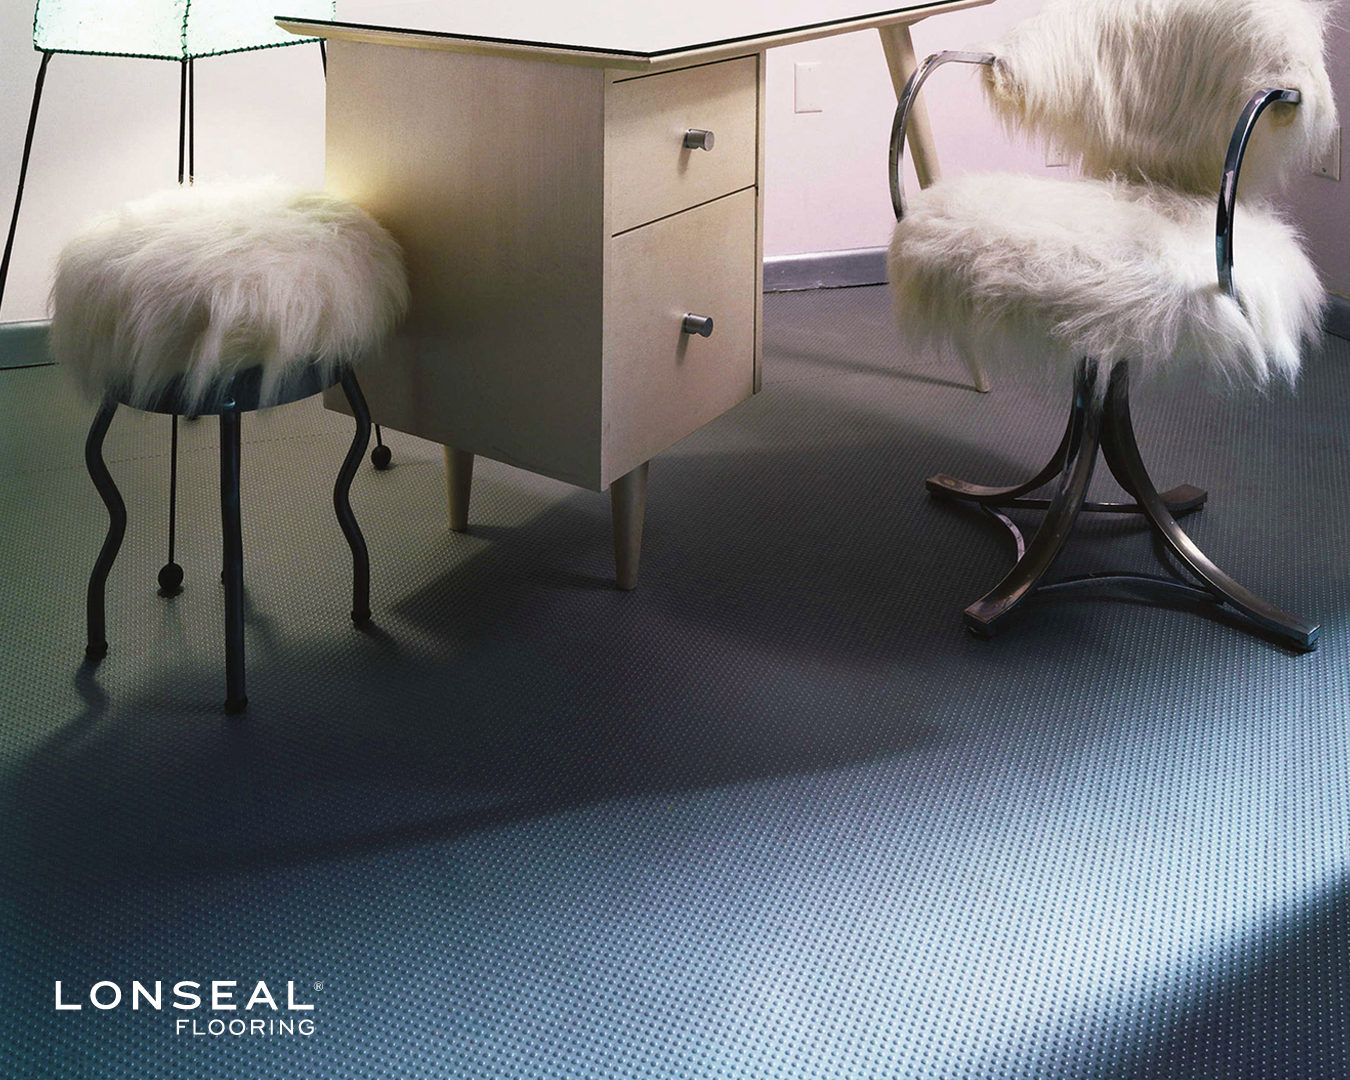 Lonseal, Sheet Vinyl Flooring, The studded embossing and deeply saturated colors of LONPEARL offer a stylishly textured